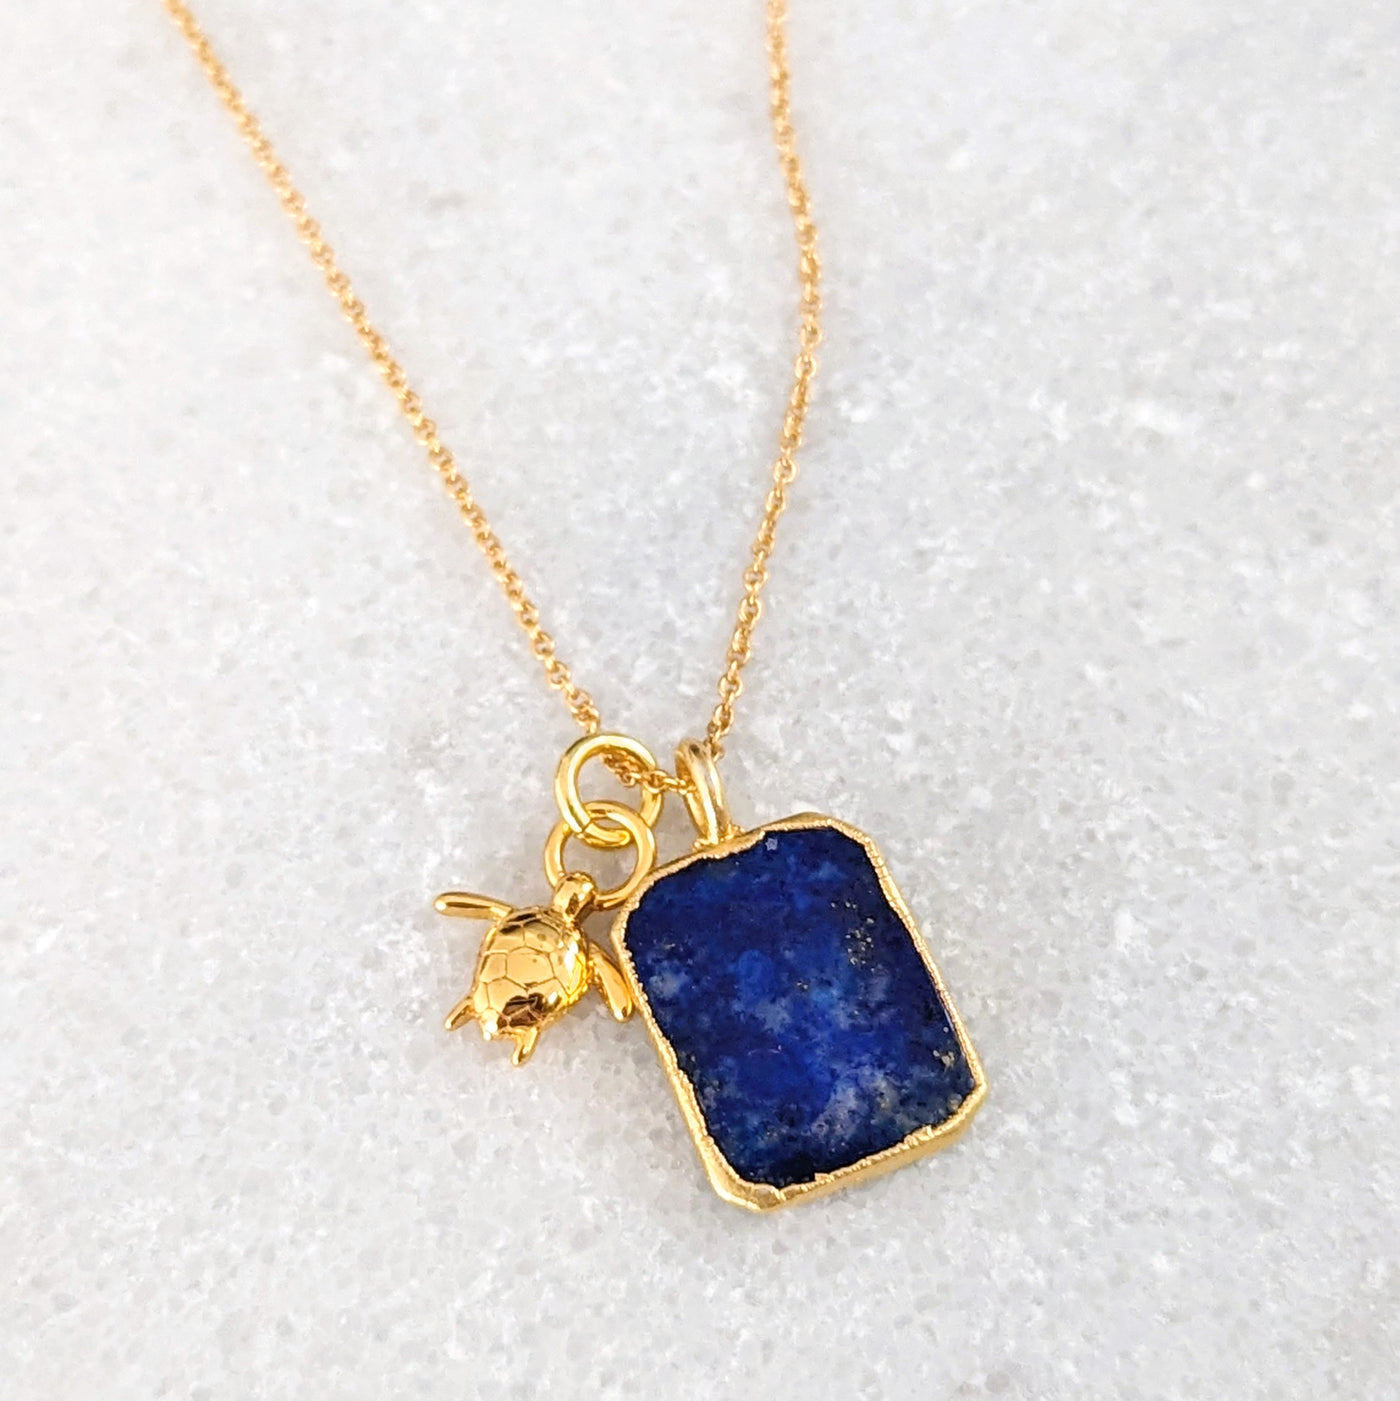 The Duo Lapis Lazuli Necklace - 18ct Gold Plated